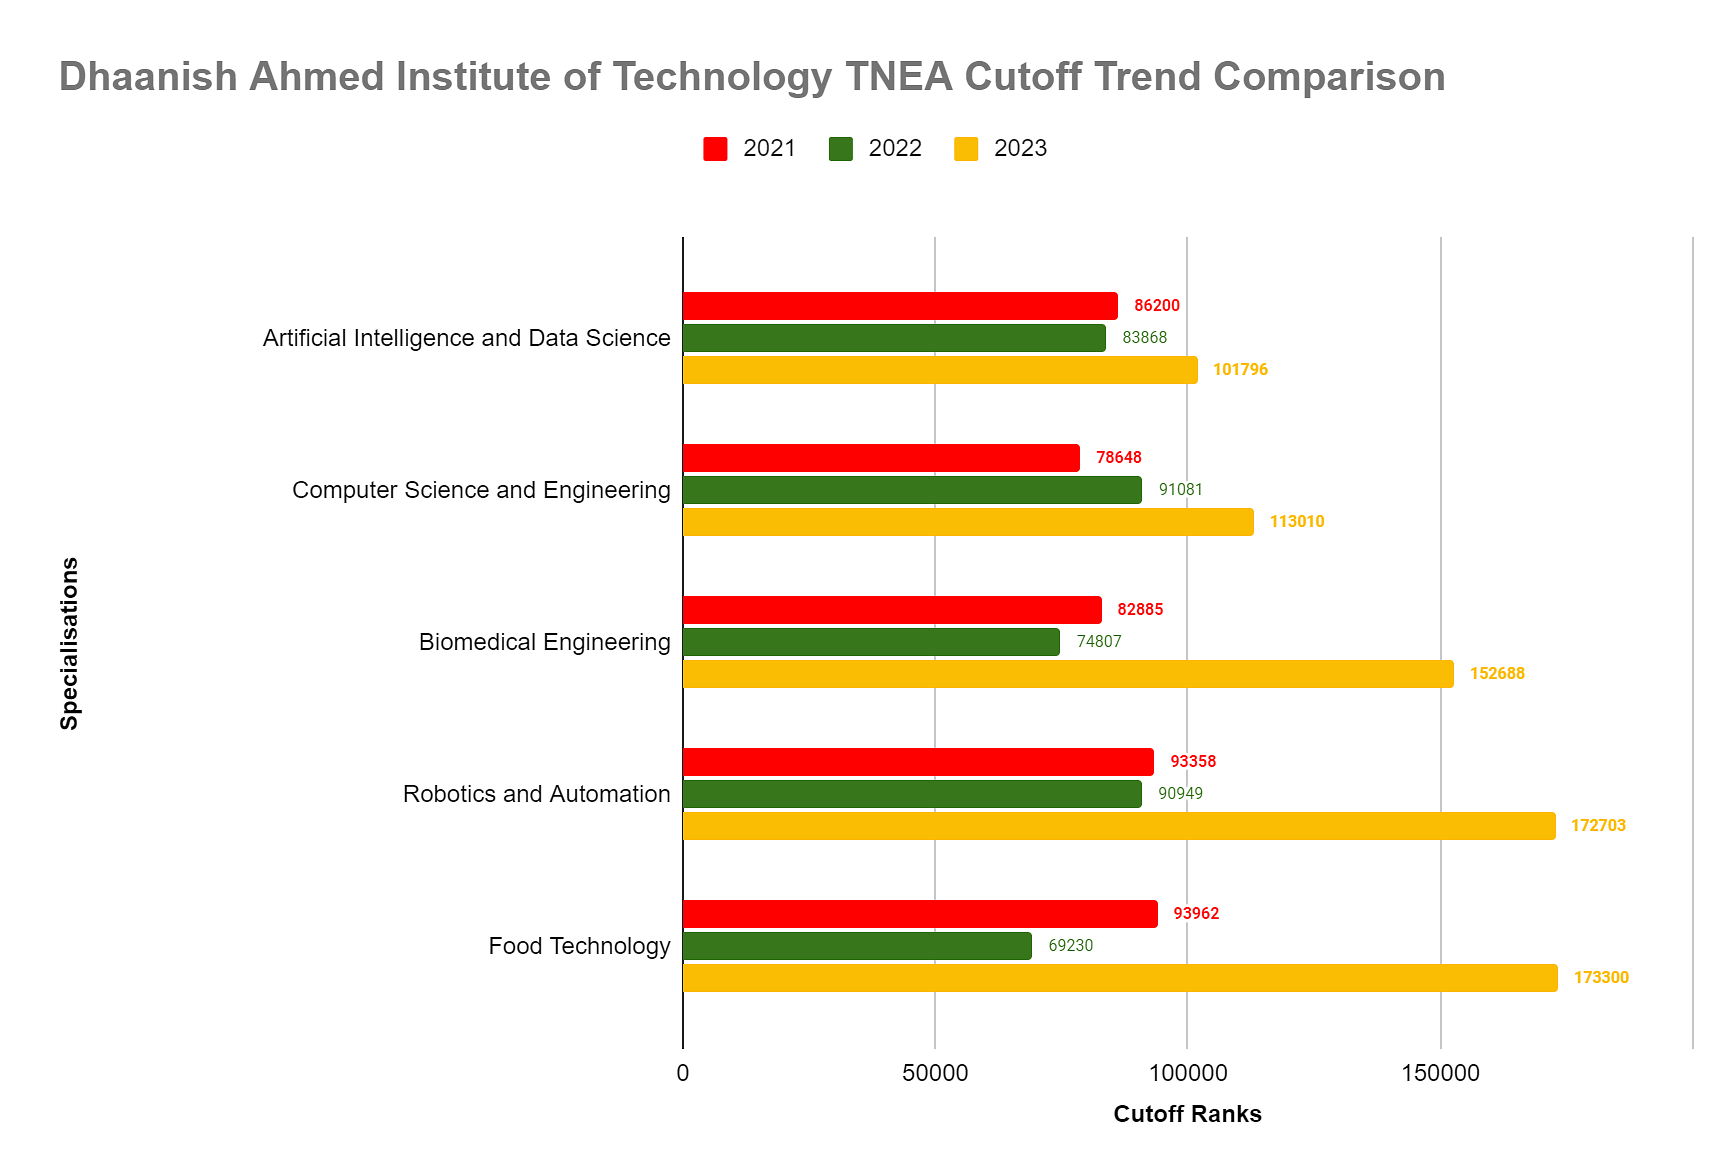 Dhaanish Ahmed Institute of Technology Cutoff Trends